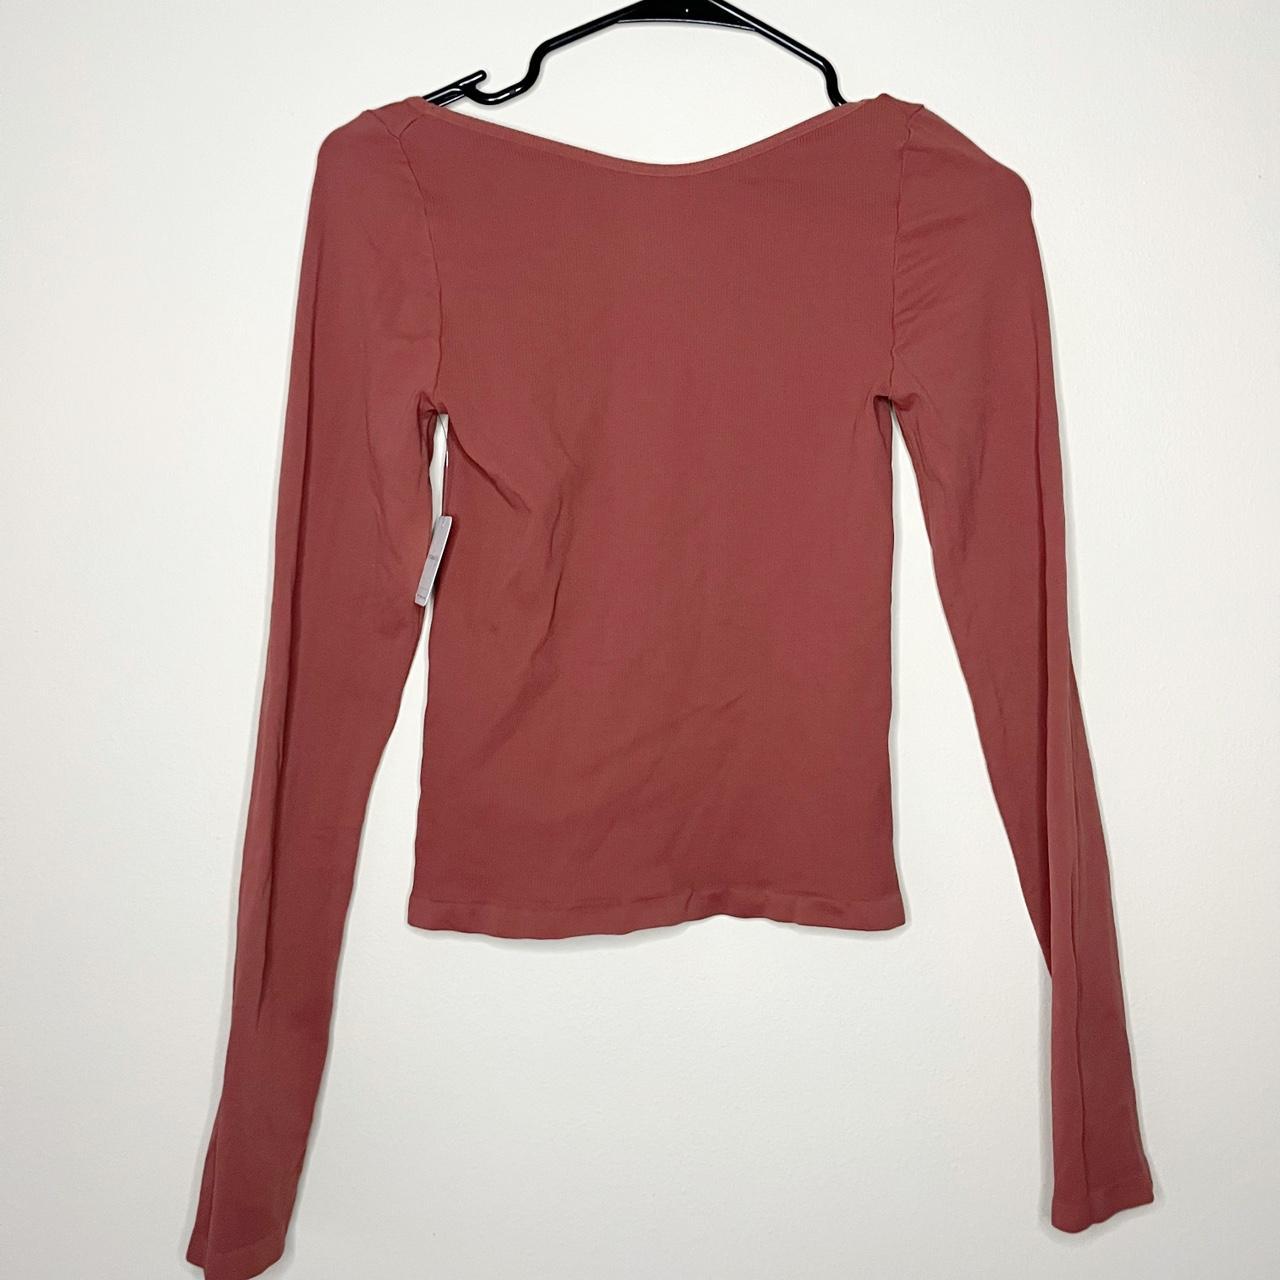 Free People Women's Brown and Burgundy Shirt (6)